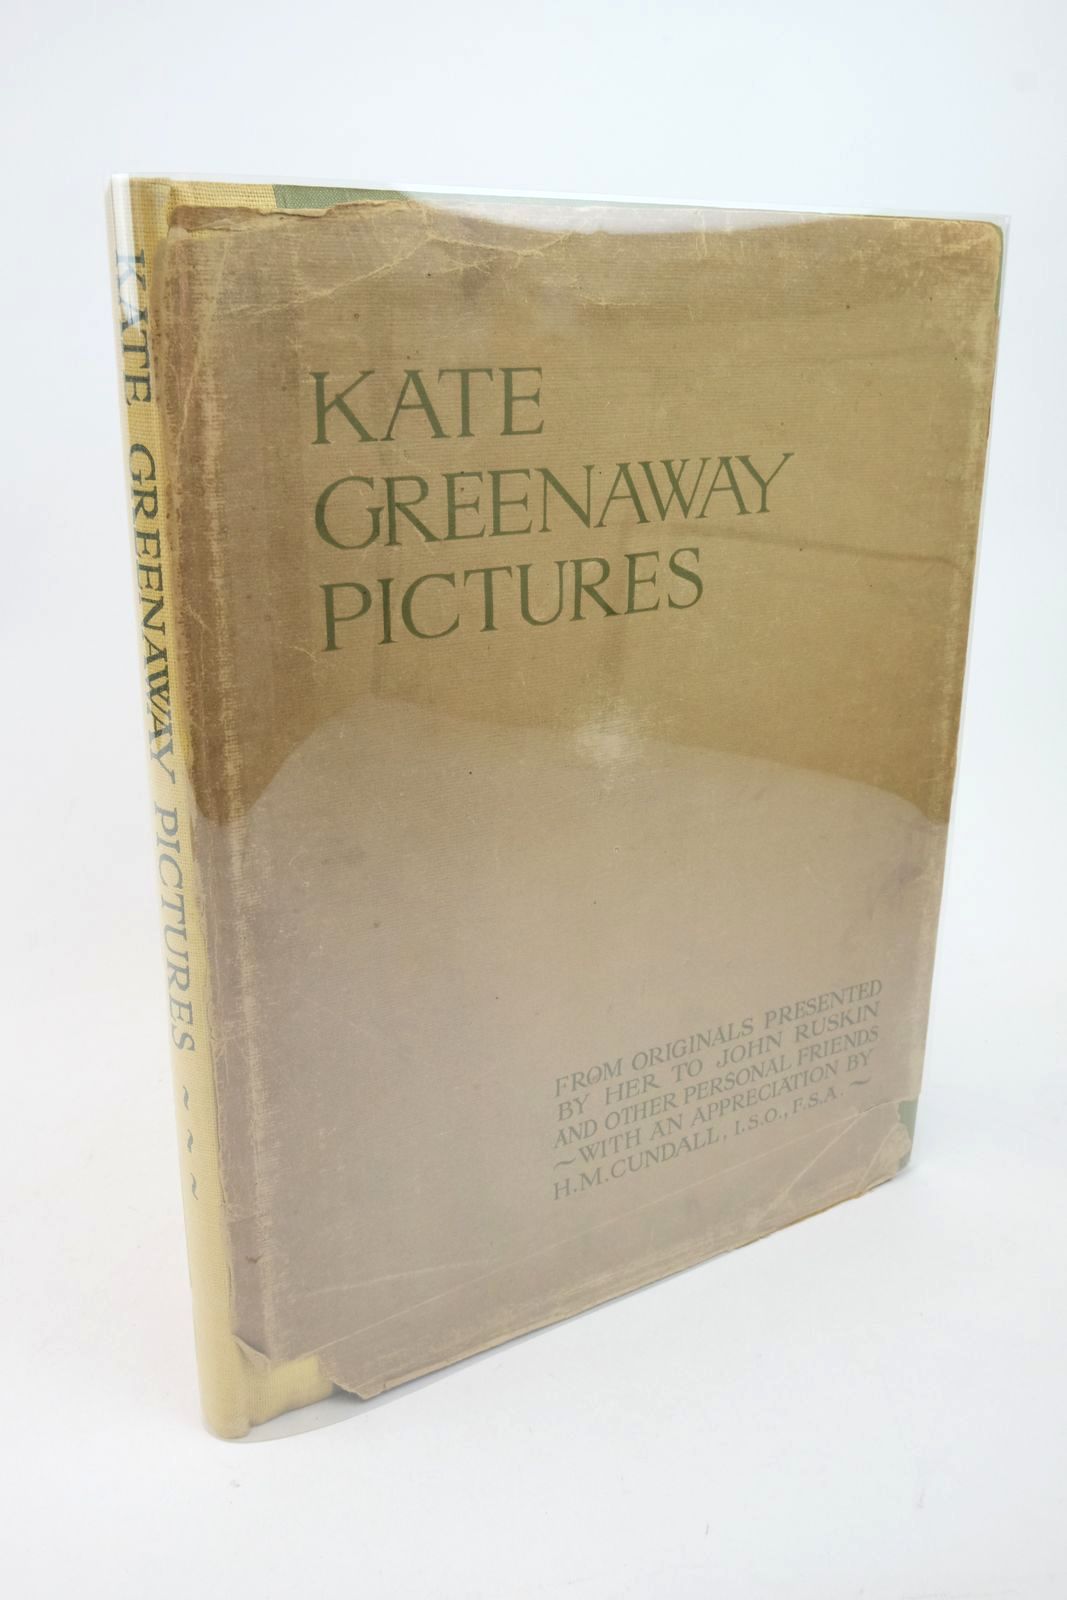 Photo of KATE GREENAWAY PICTURES- Stock Number: 1322845